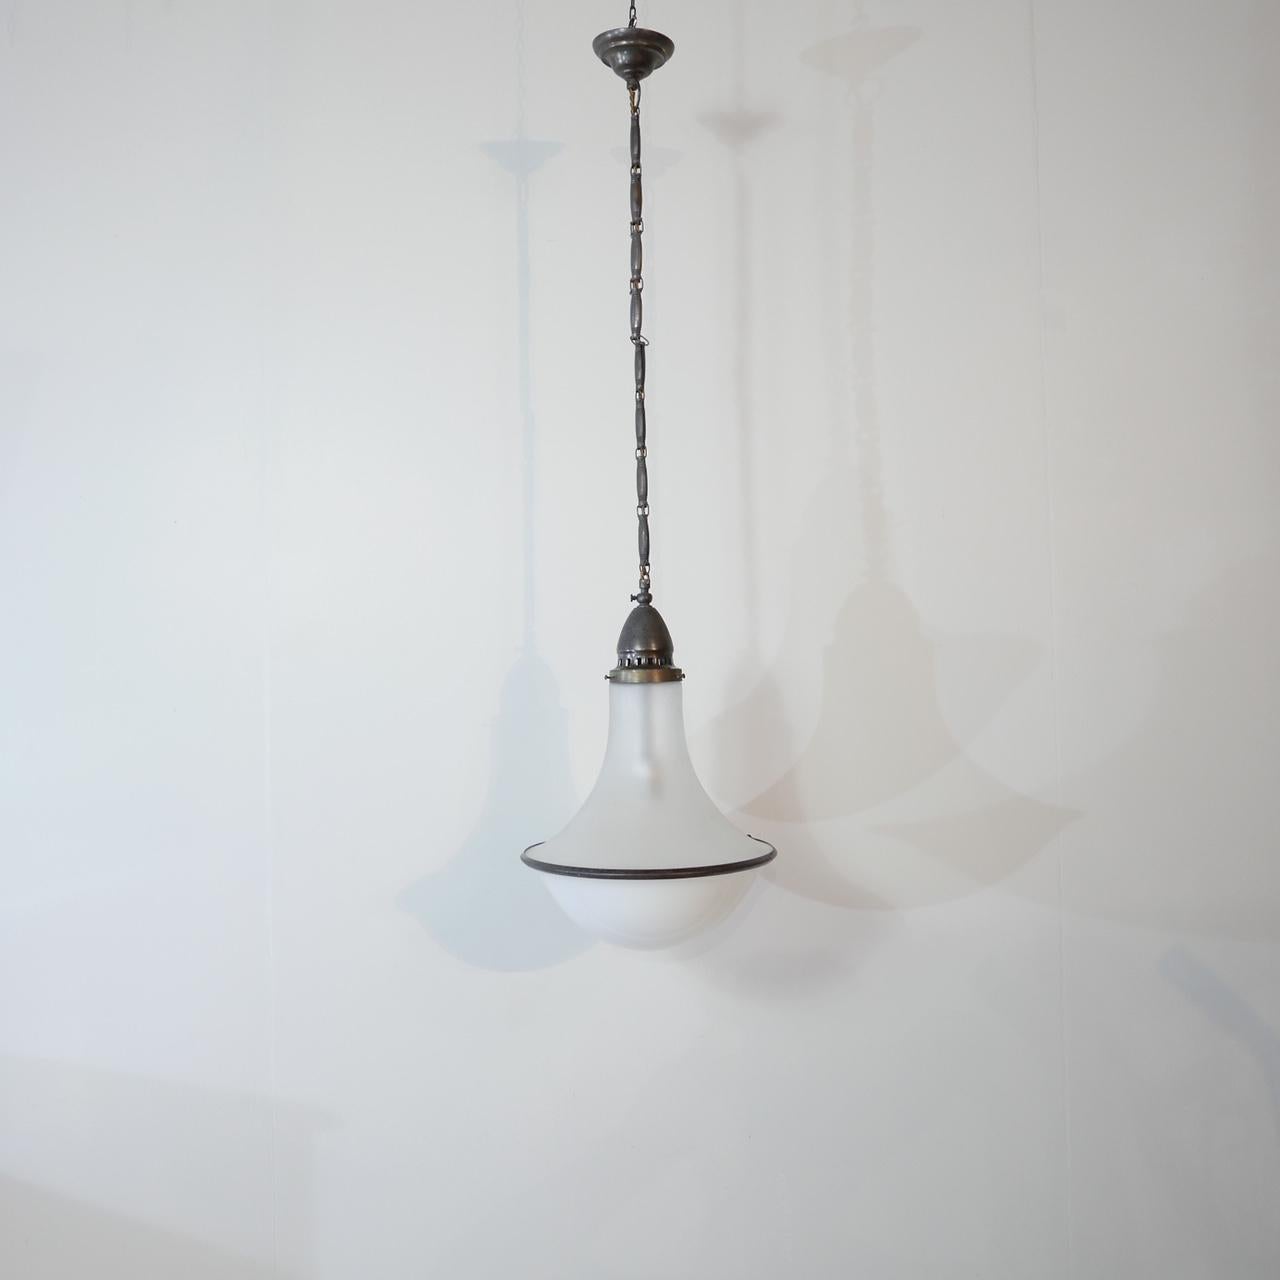 A two tone pendant light.

Opaline base, etched glass top, patinated brass rim and gallery.

Original chain and gallery retained.

A rare model we have not seen before. The chain is reminiscent of Siemens and Schukert.

Early 20th century,